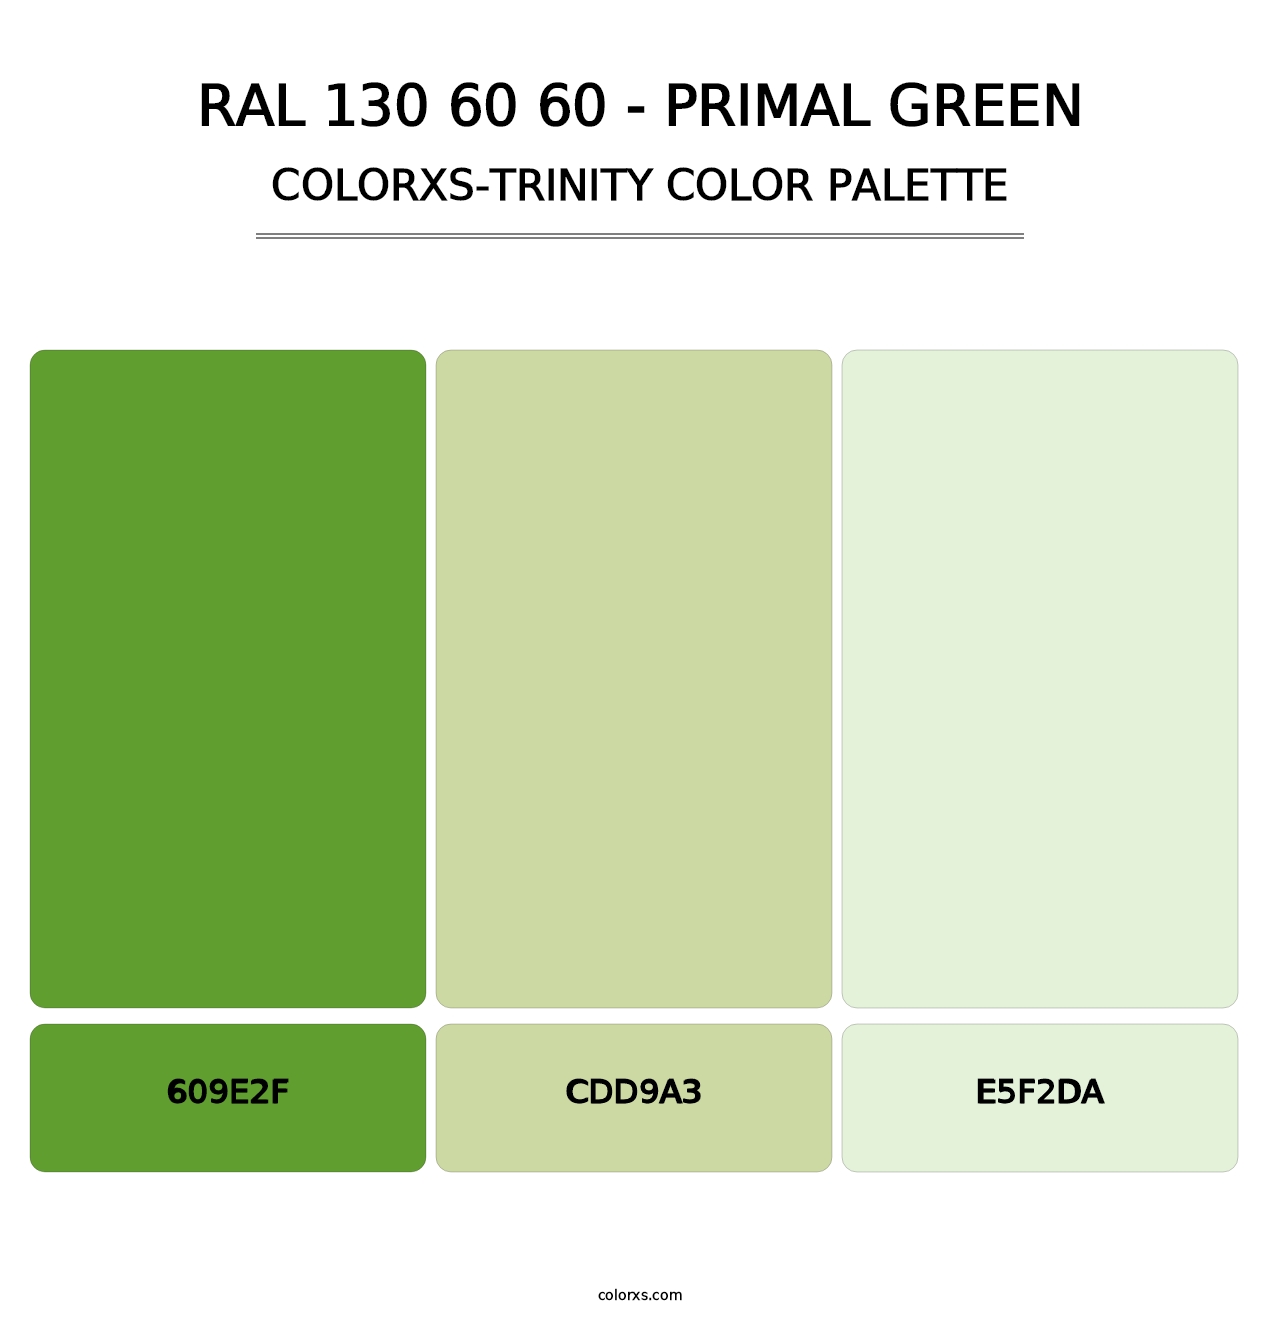 RAL 130 60 60 - Primal Green - Colorxs Trinity Palette